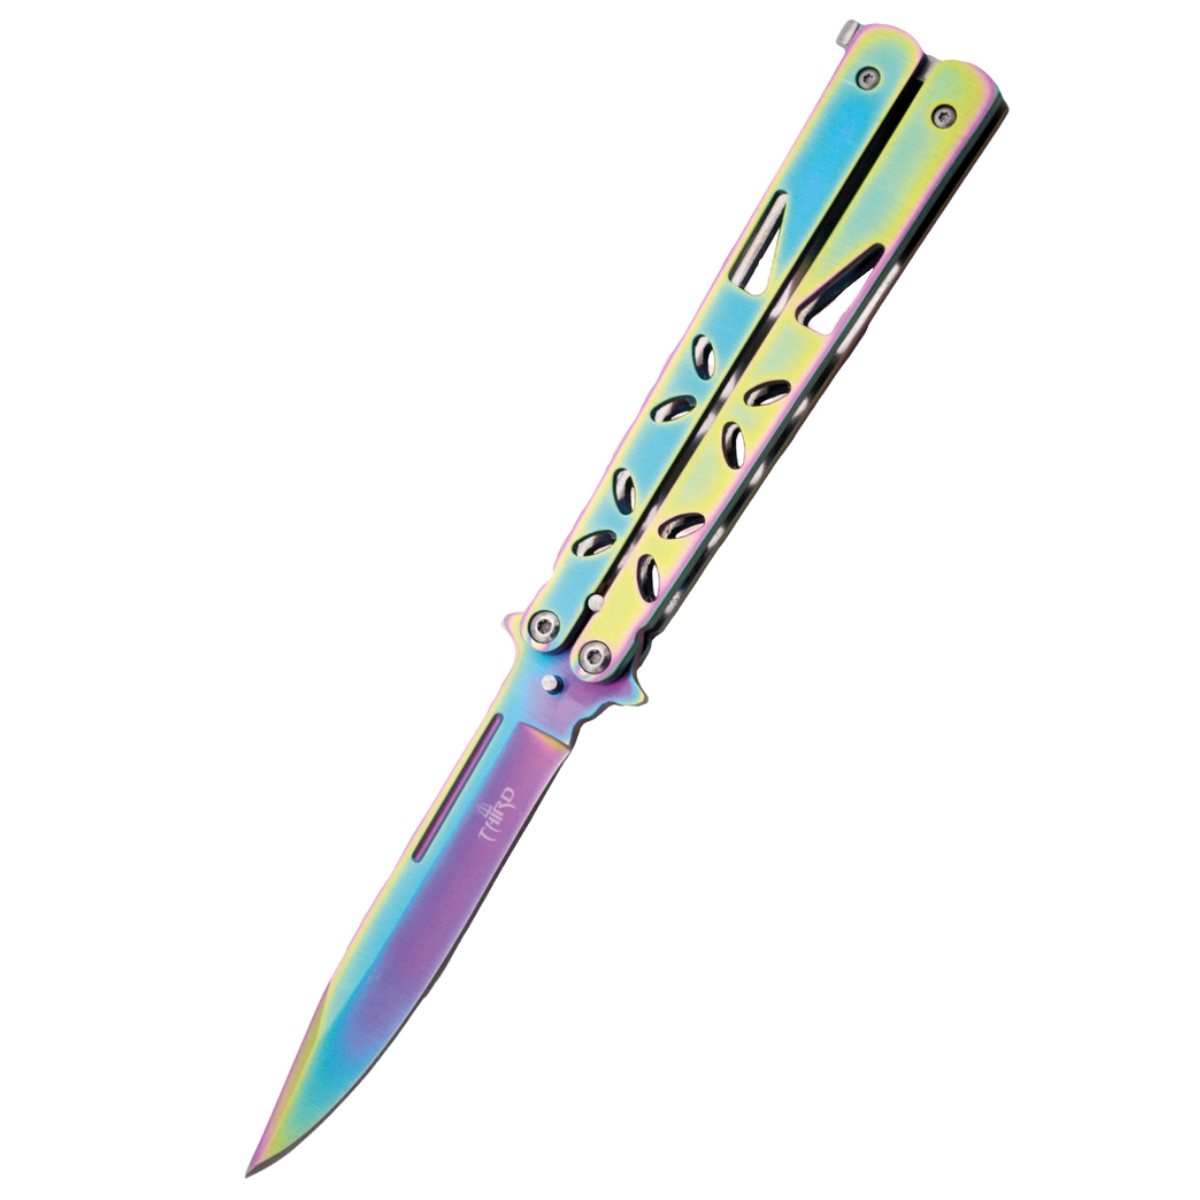 Third Balisong Rainbow Stainless Steel, Rainbow Butterfly Knife (K2450)   KNIVES, SHARPENERS, TOOLS \ Knives by type \ Folders KNIVES, SHARPENERS,  TOOLS \ Knives by type \ Balisong (butterfly knife) KNIVES, SHARPENERS